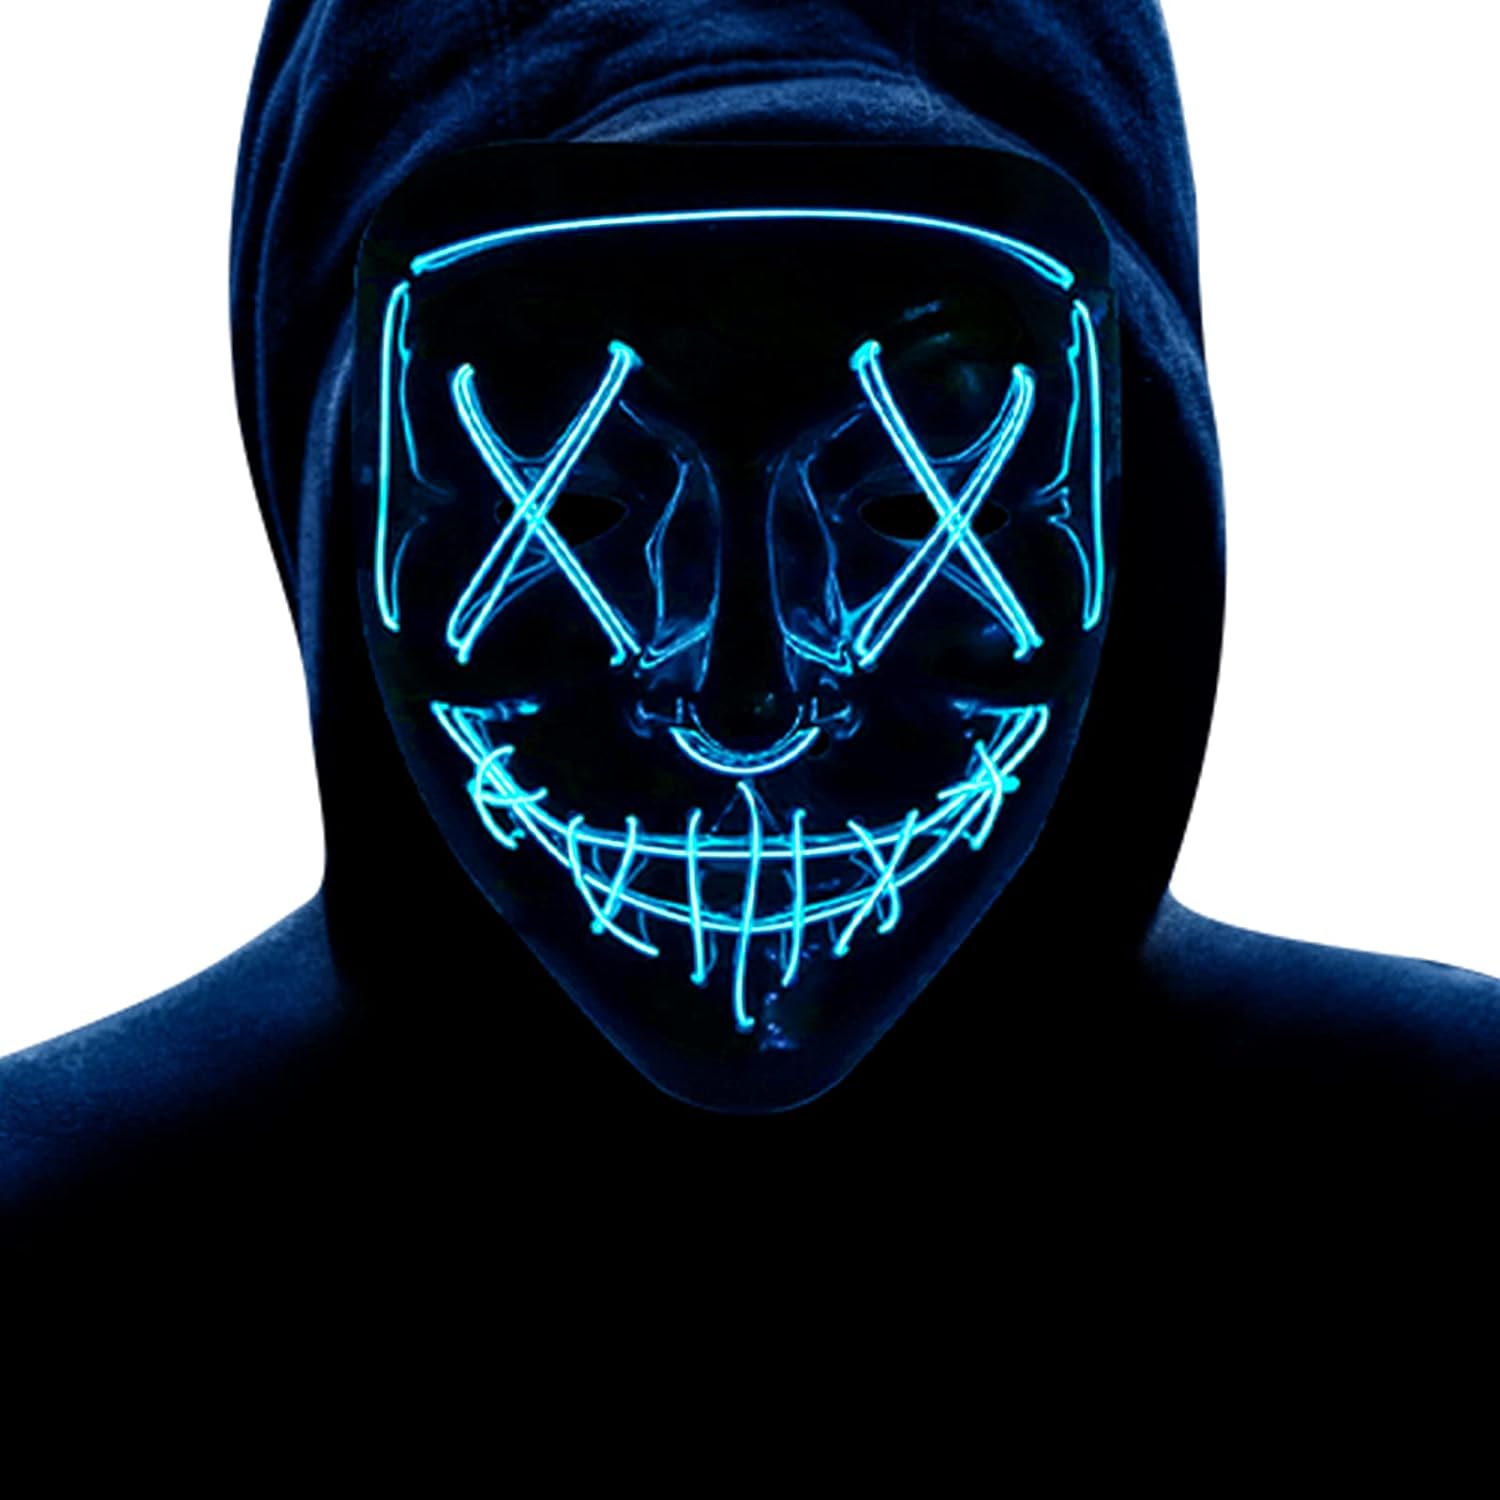 Halloween LED Light Up Mask Adjustable Glowing Mask for Halloween Festival Party Carnival Masquerade Cosplay and Costume Glow Neon Mask for Men Women Kids Red 